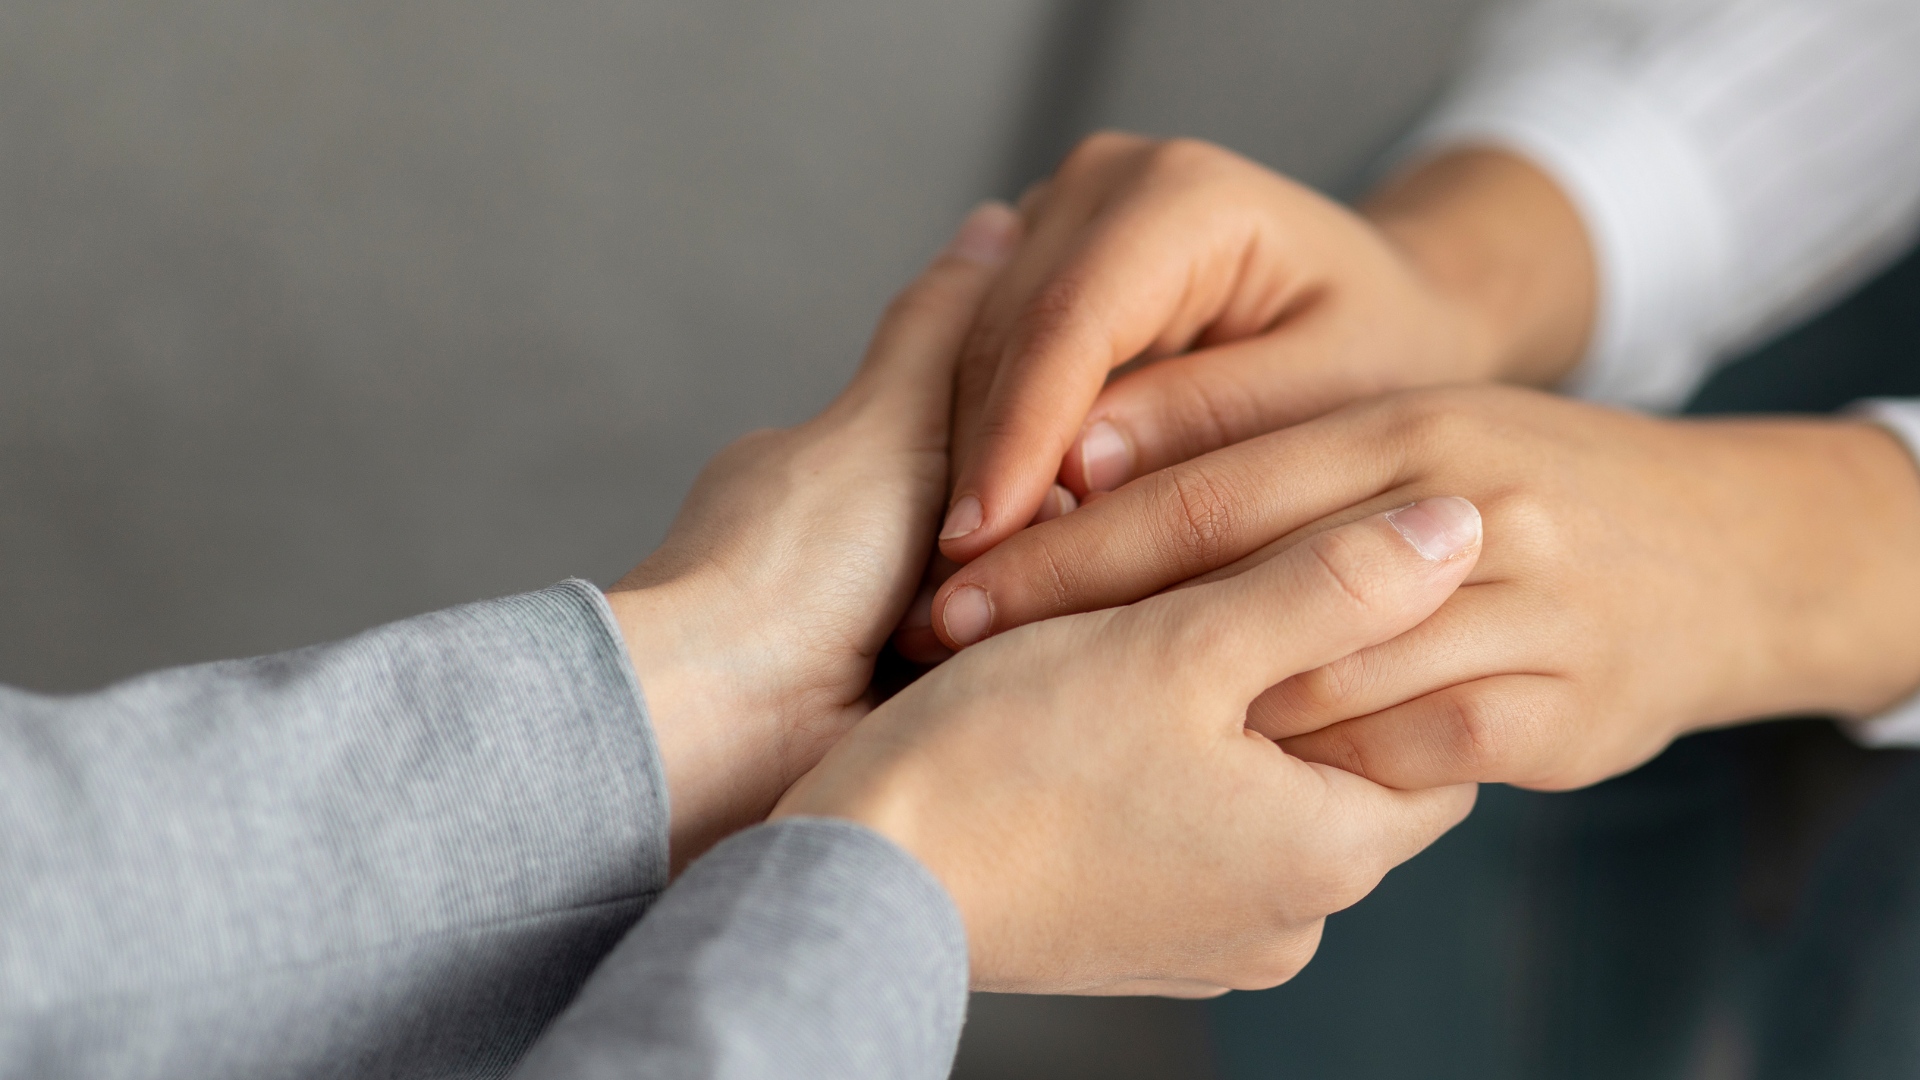 Two people holding hands in a supportive and comforting manner.